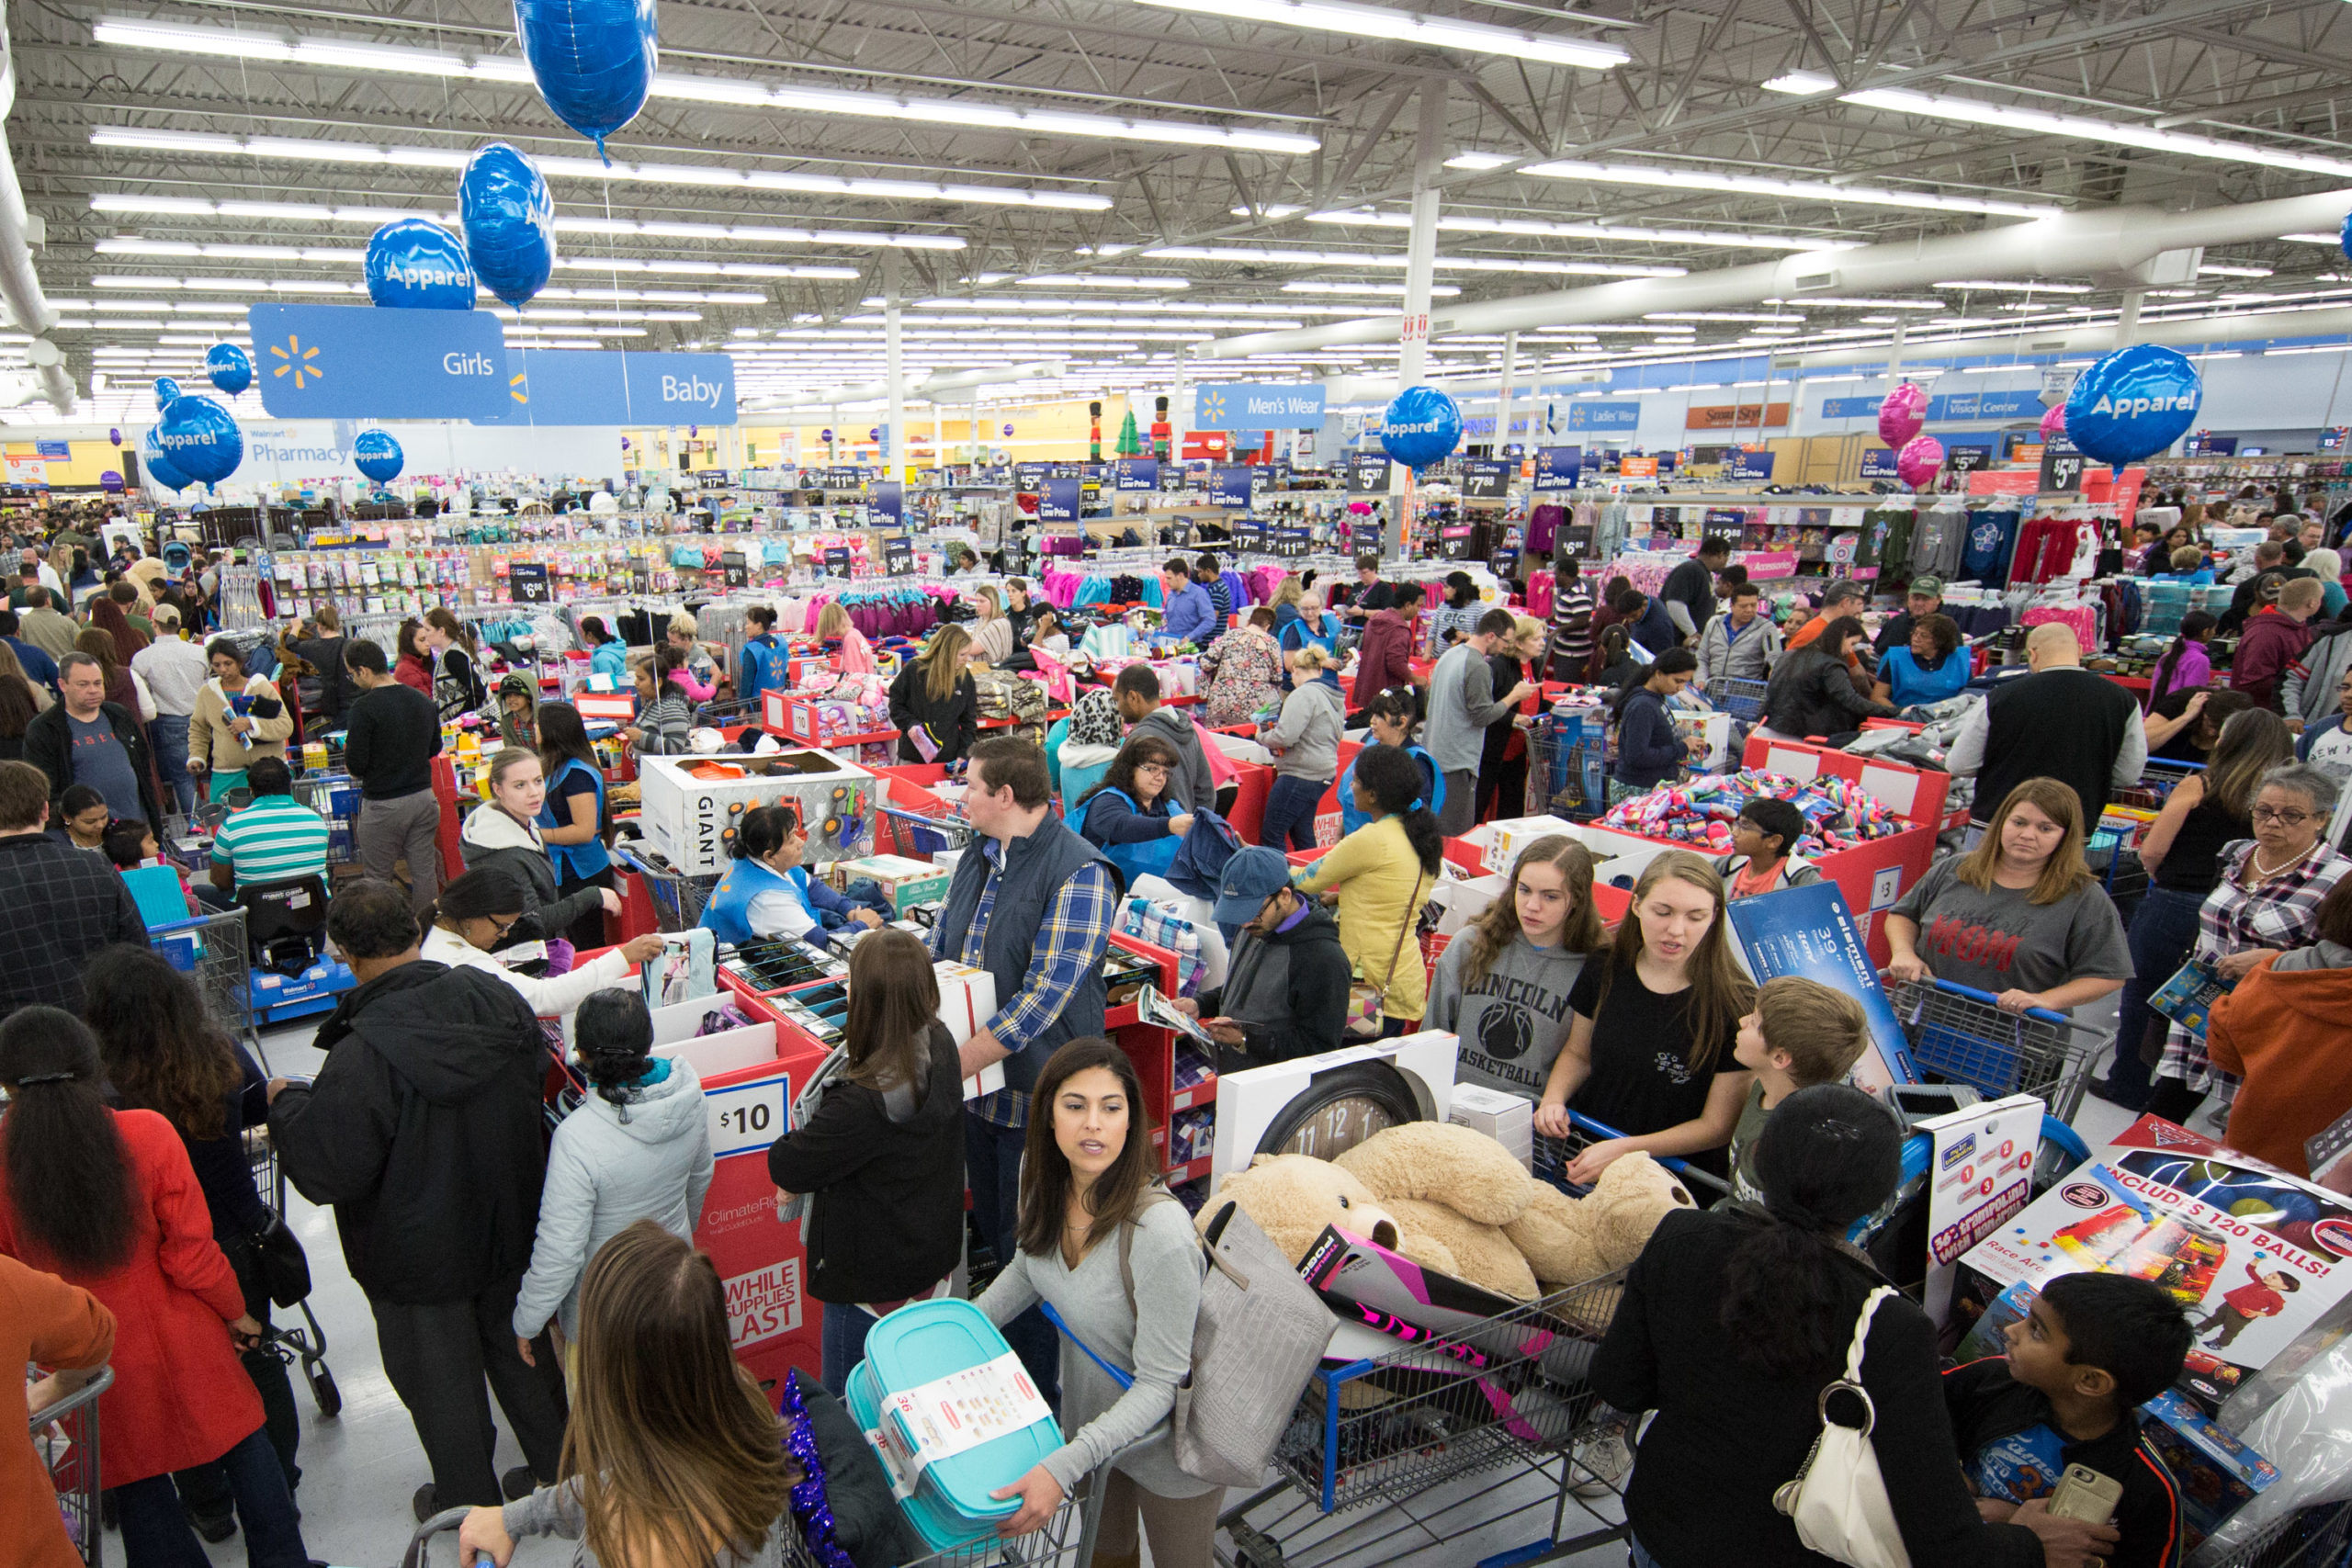 Walmart To Begin Black Friday Sale On Wednesday Night Before Thanksgiving